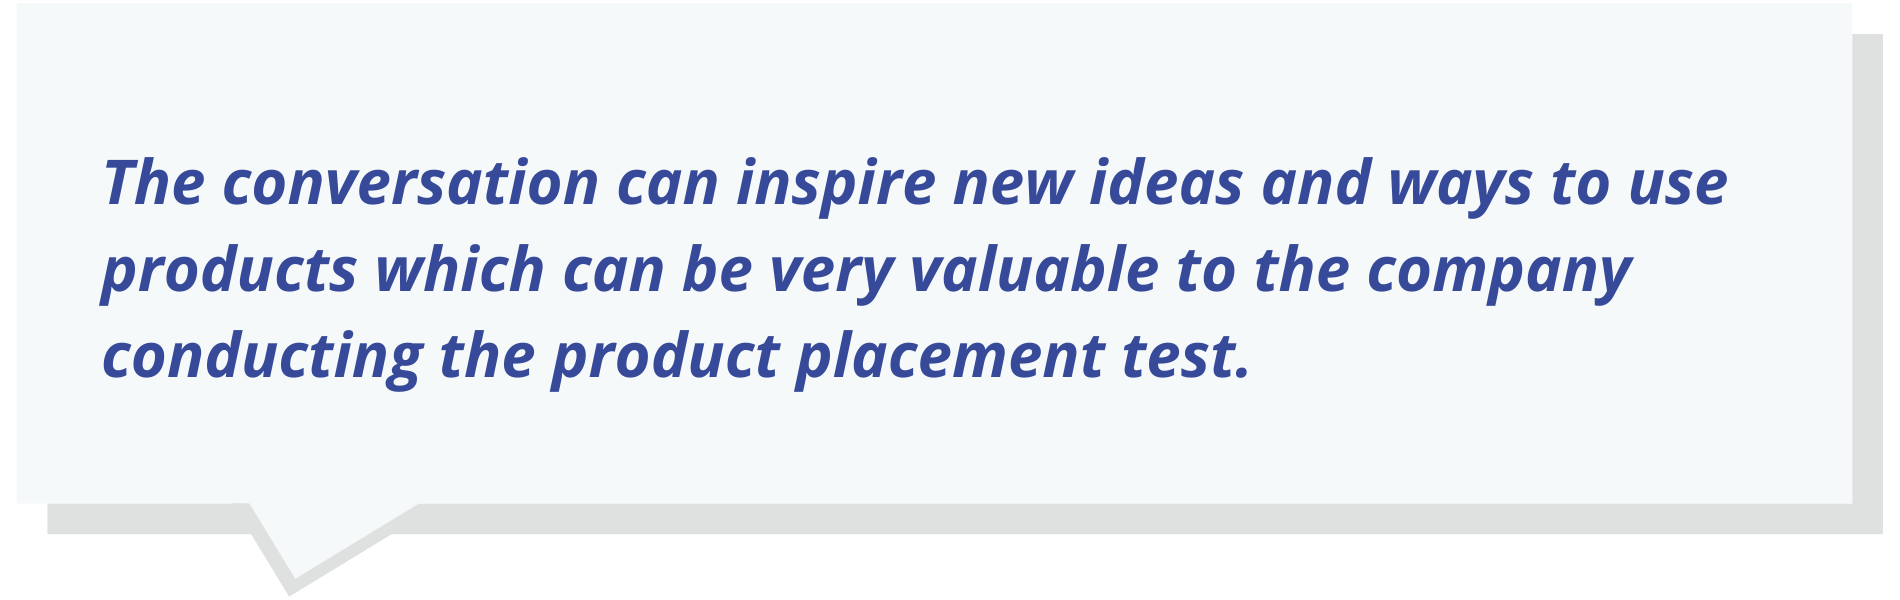 The conversation can inspire new ideas and ways to use products which can be very valuable to the company conducting the product placement test.